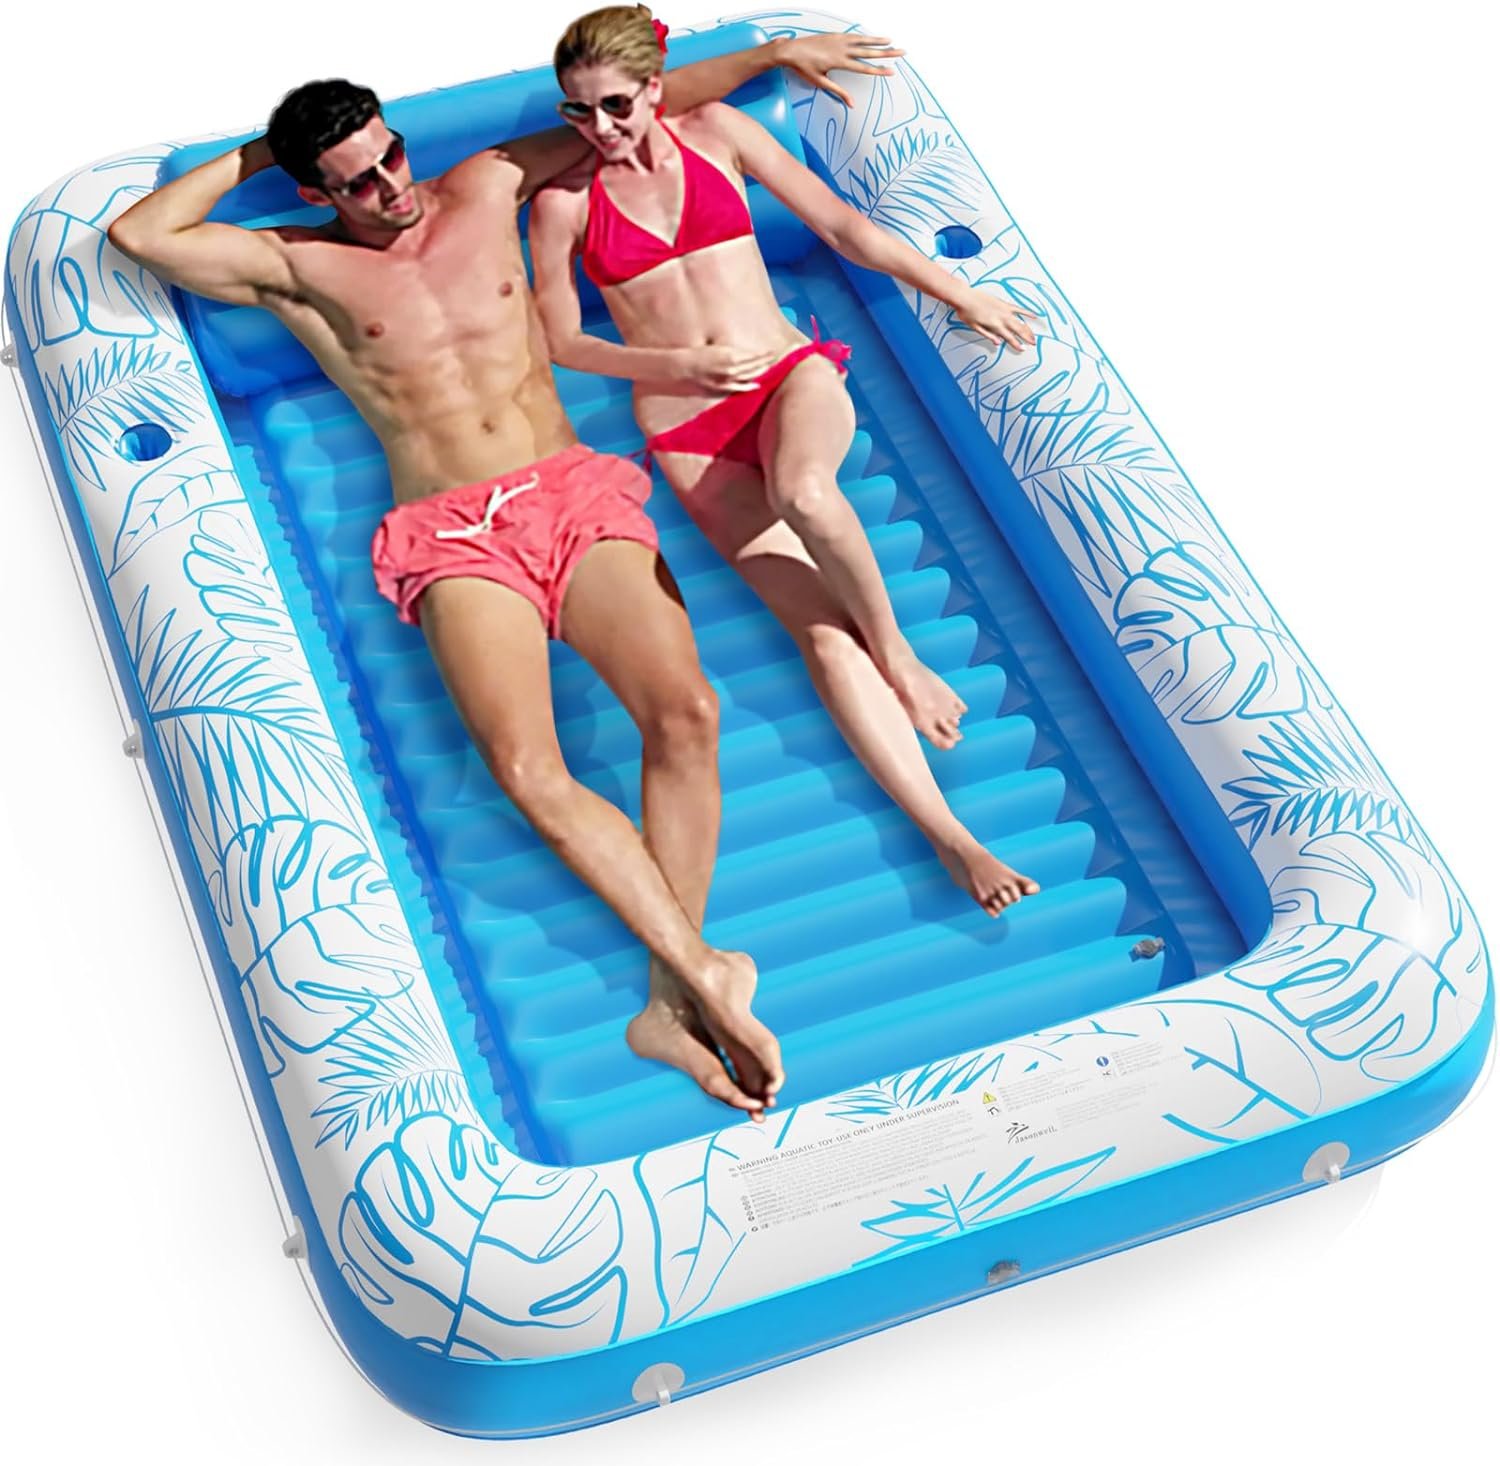 Inflatable Tanning Pool Lounger Float - Jasonwell 4 in 1 Sun Tan Tub Sunbathing Pool Lounge Raft Floatie Toys Water Filled Bed Mat Pad for Adult Blow Up Kiddie Pool Kids Ball Pit Pool (L)